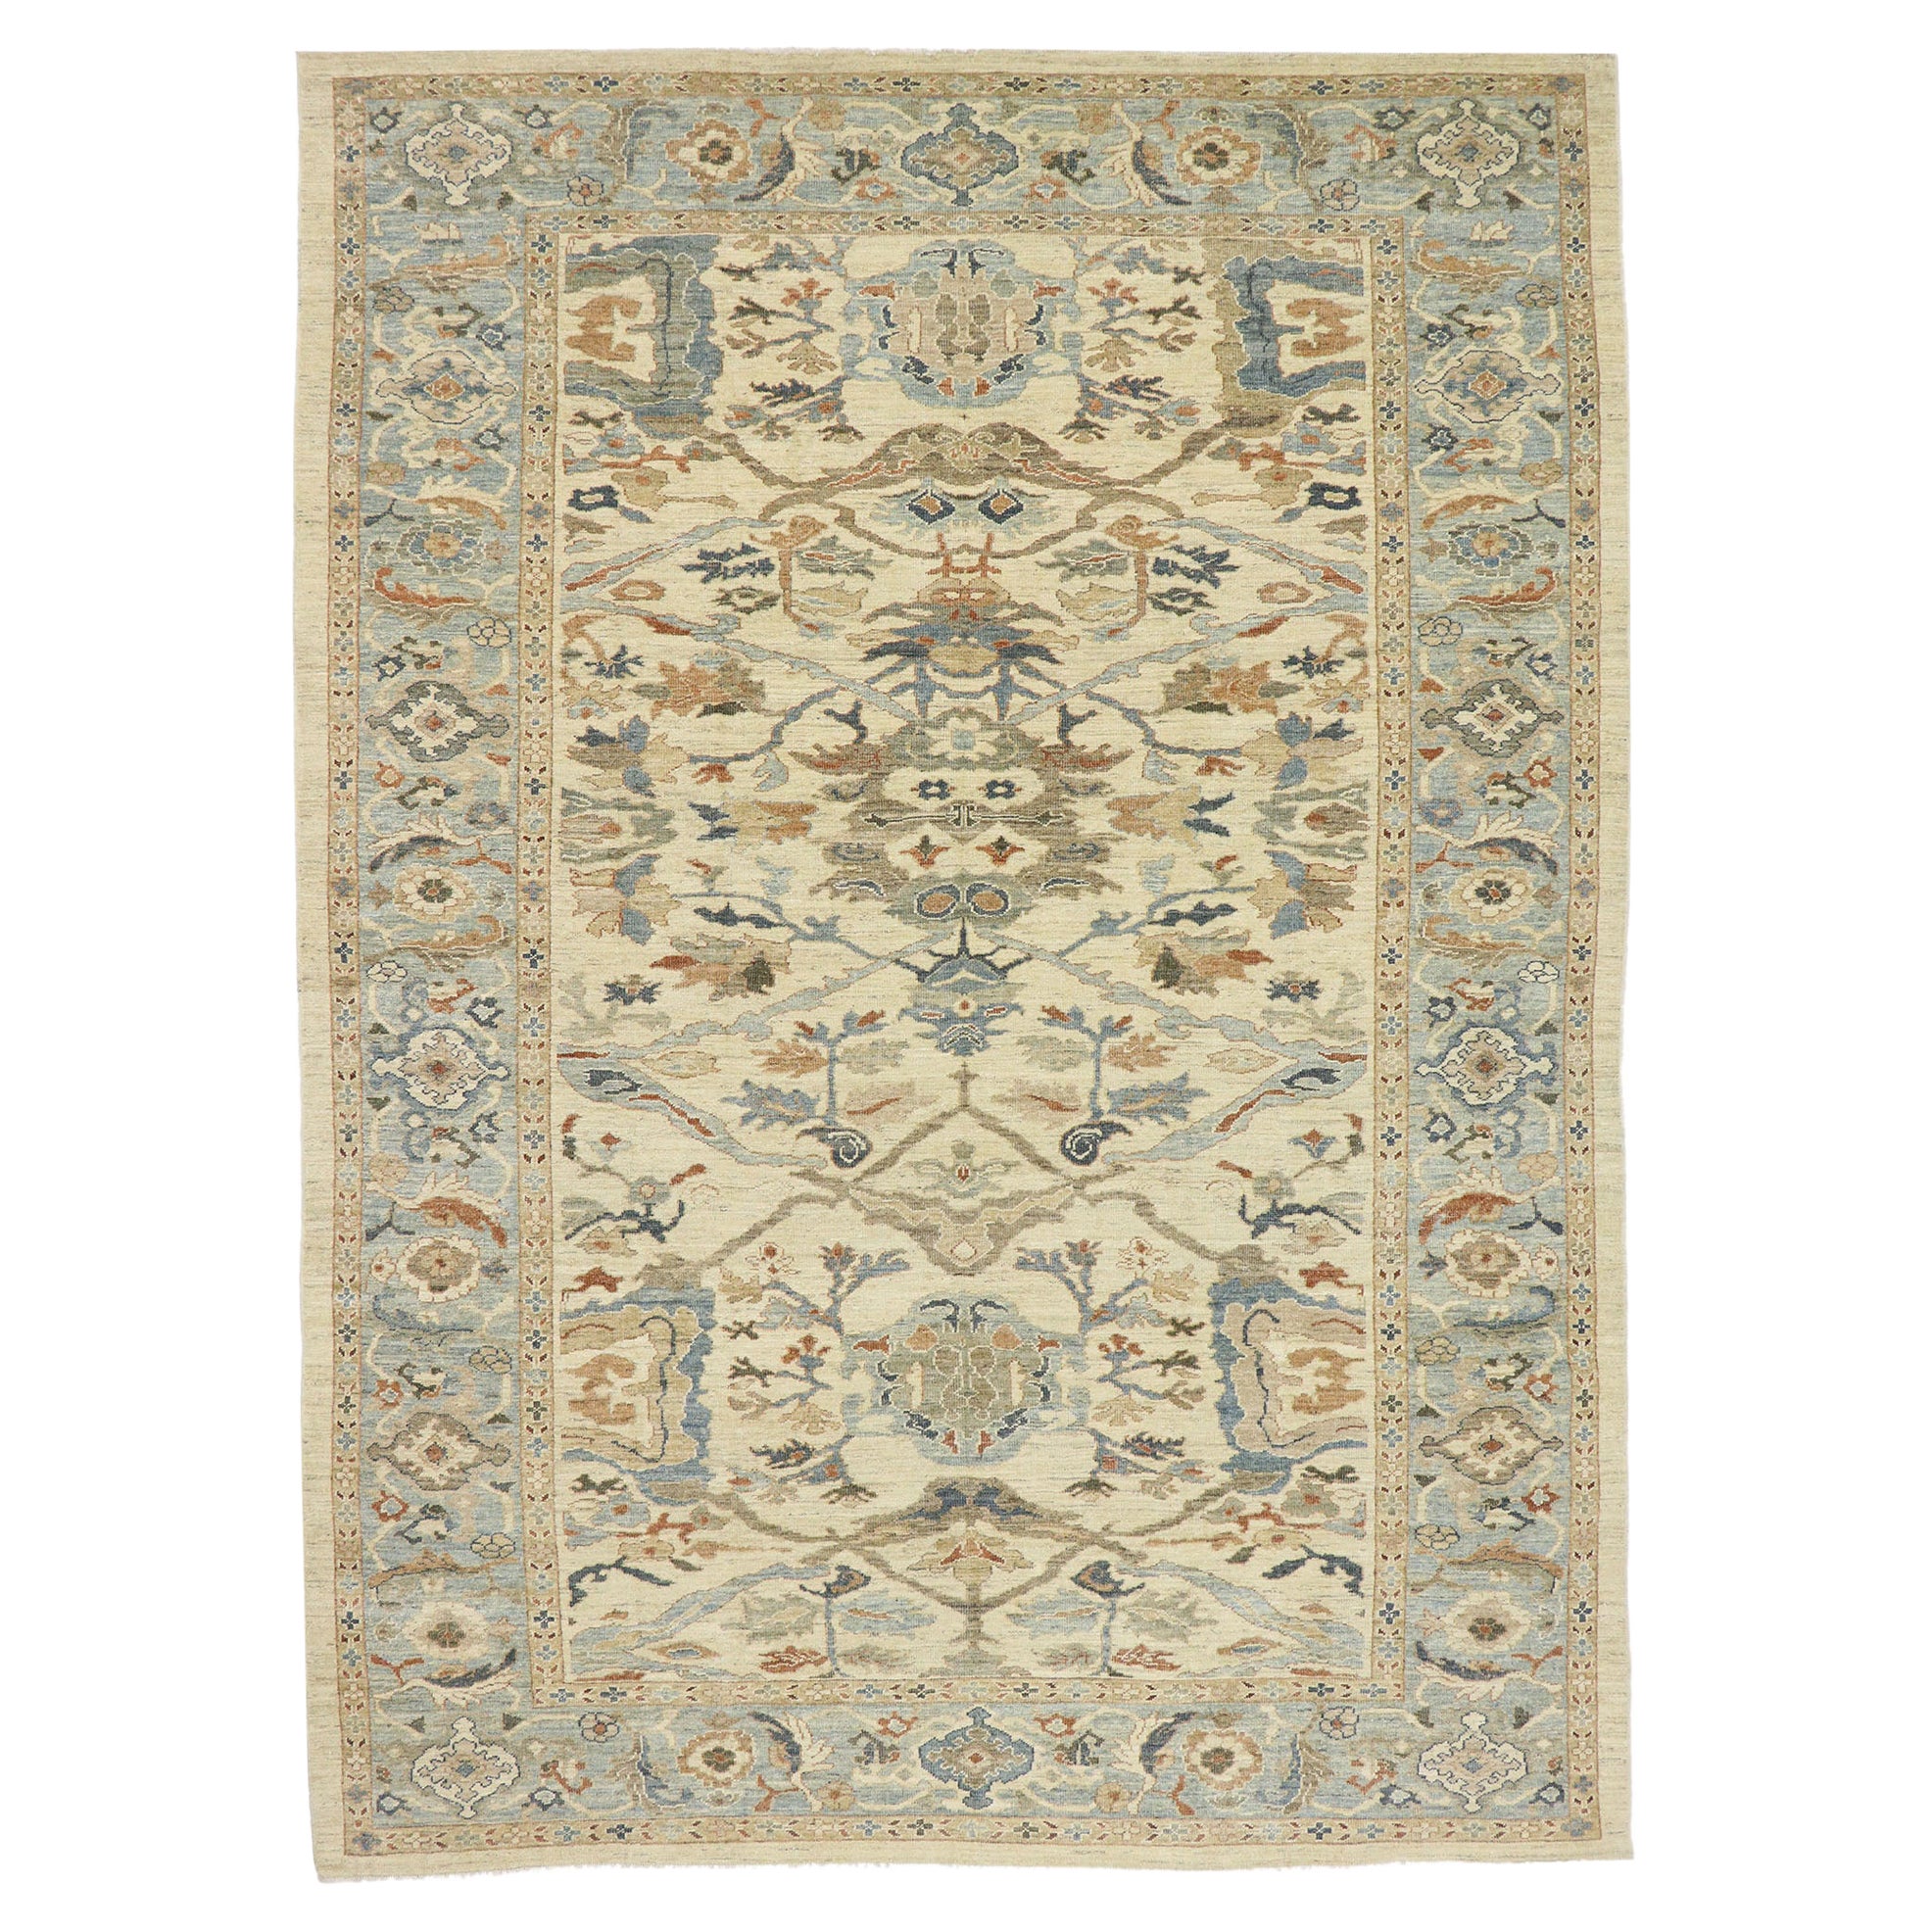 New Contemporary Persian Sultanabad Rug with Transitional Modern Style (Nouveau tapis persan contemporain de Sultanabad avec style moderne transitionnel)